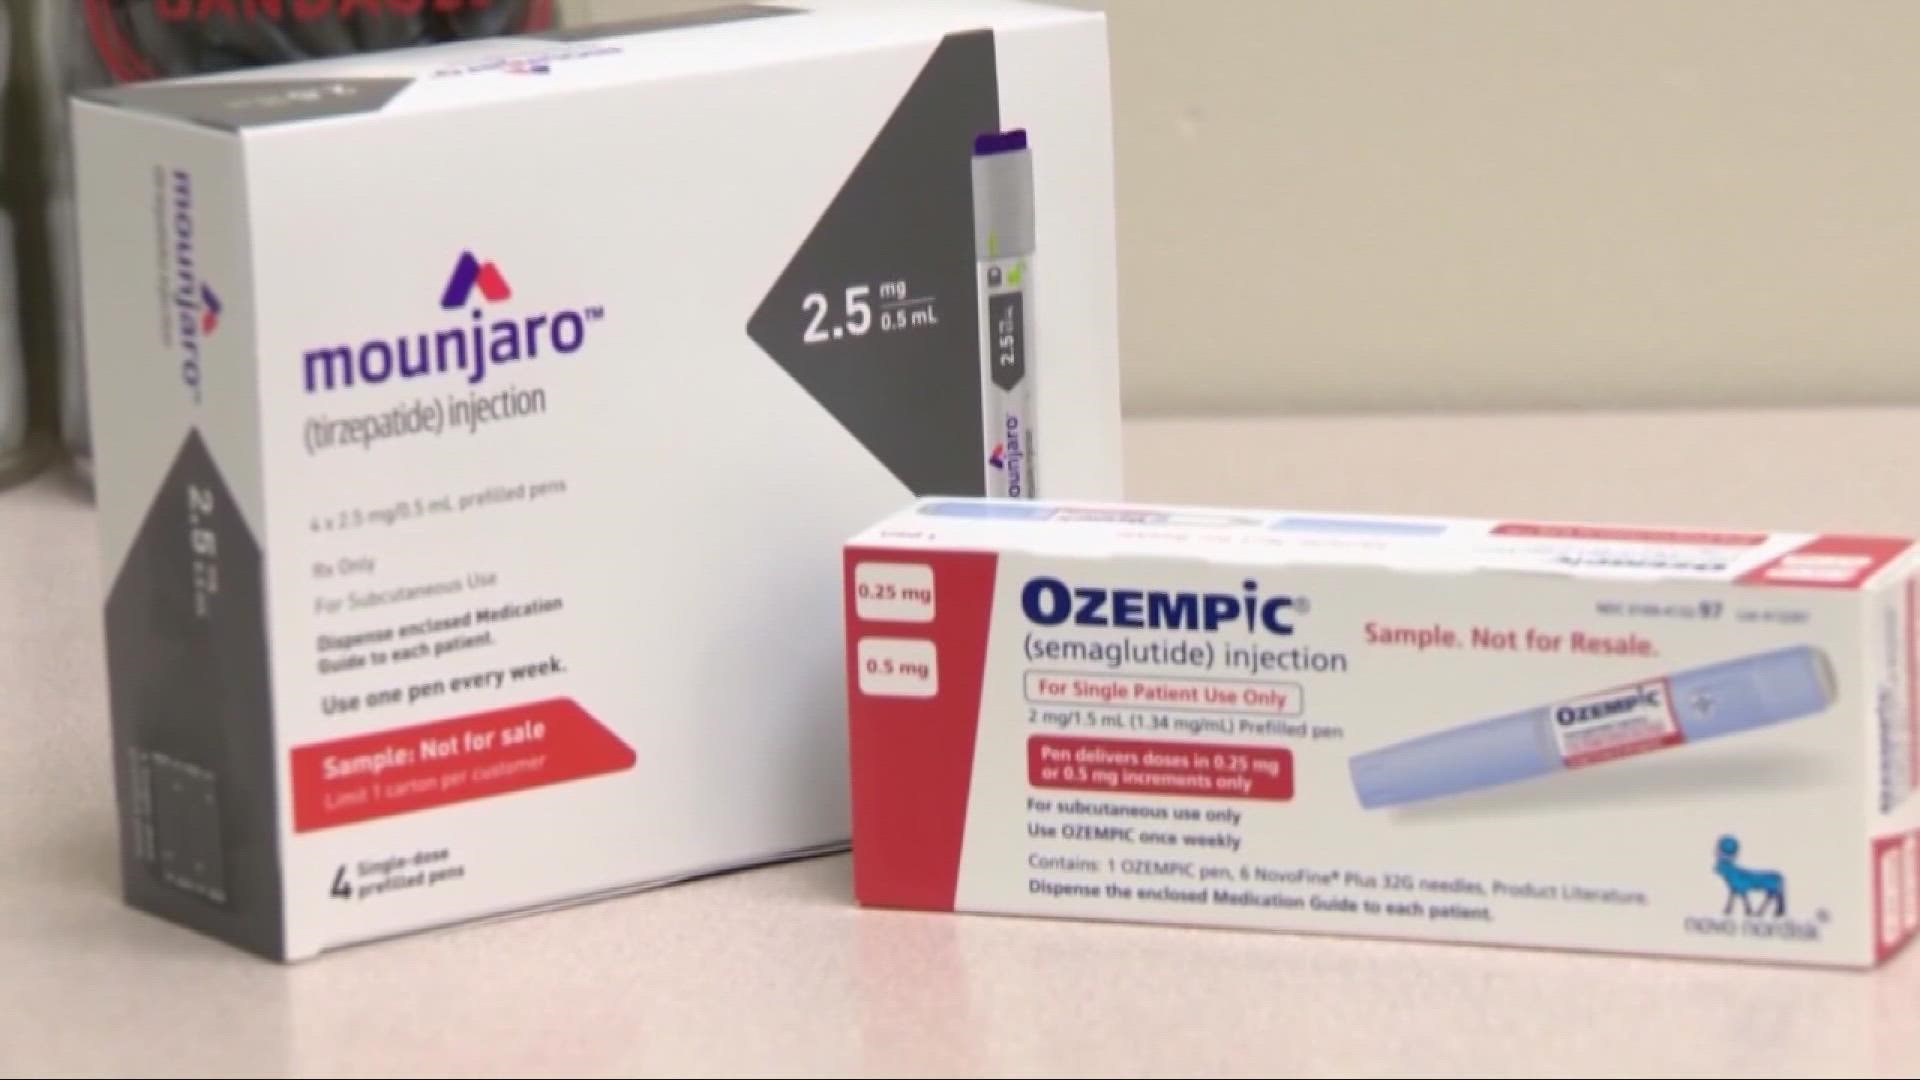 Ozempic is listed as a treatment for Type 2 diabetes, but doctors are increasingly using it to tackle obesity in patients.